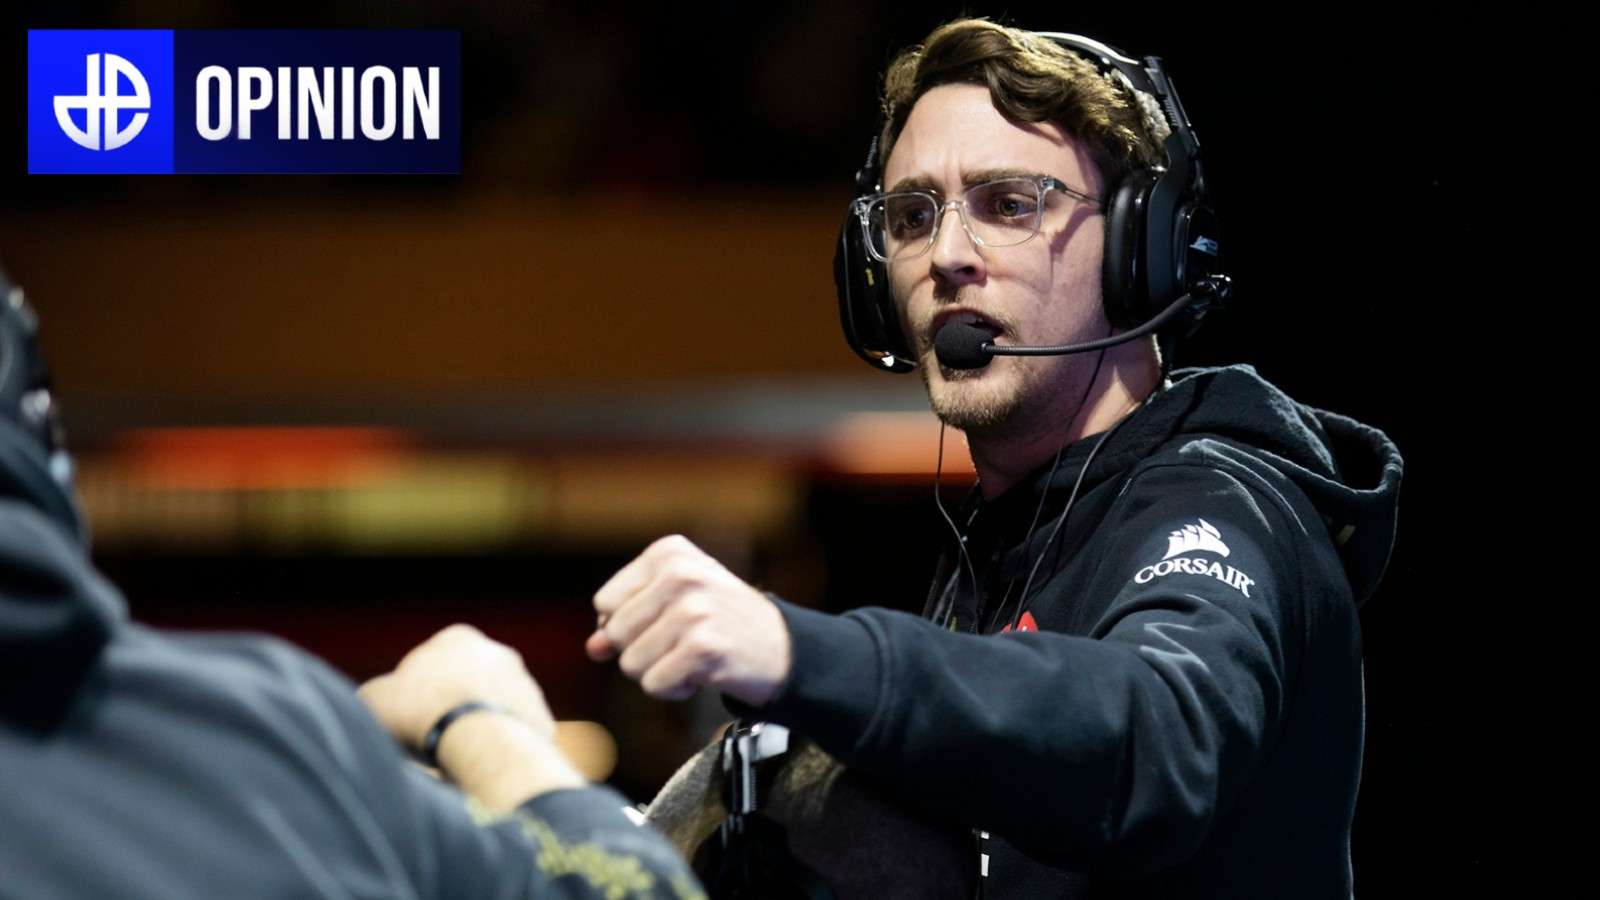 Clayster for New York Subliners in CDL